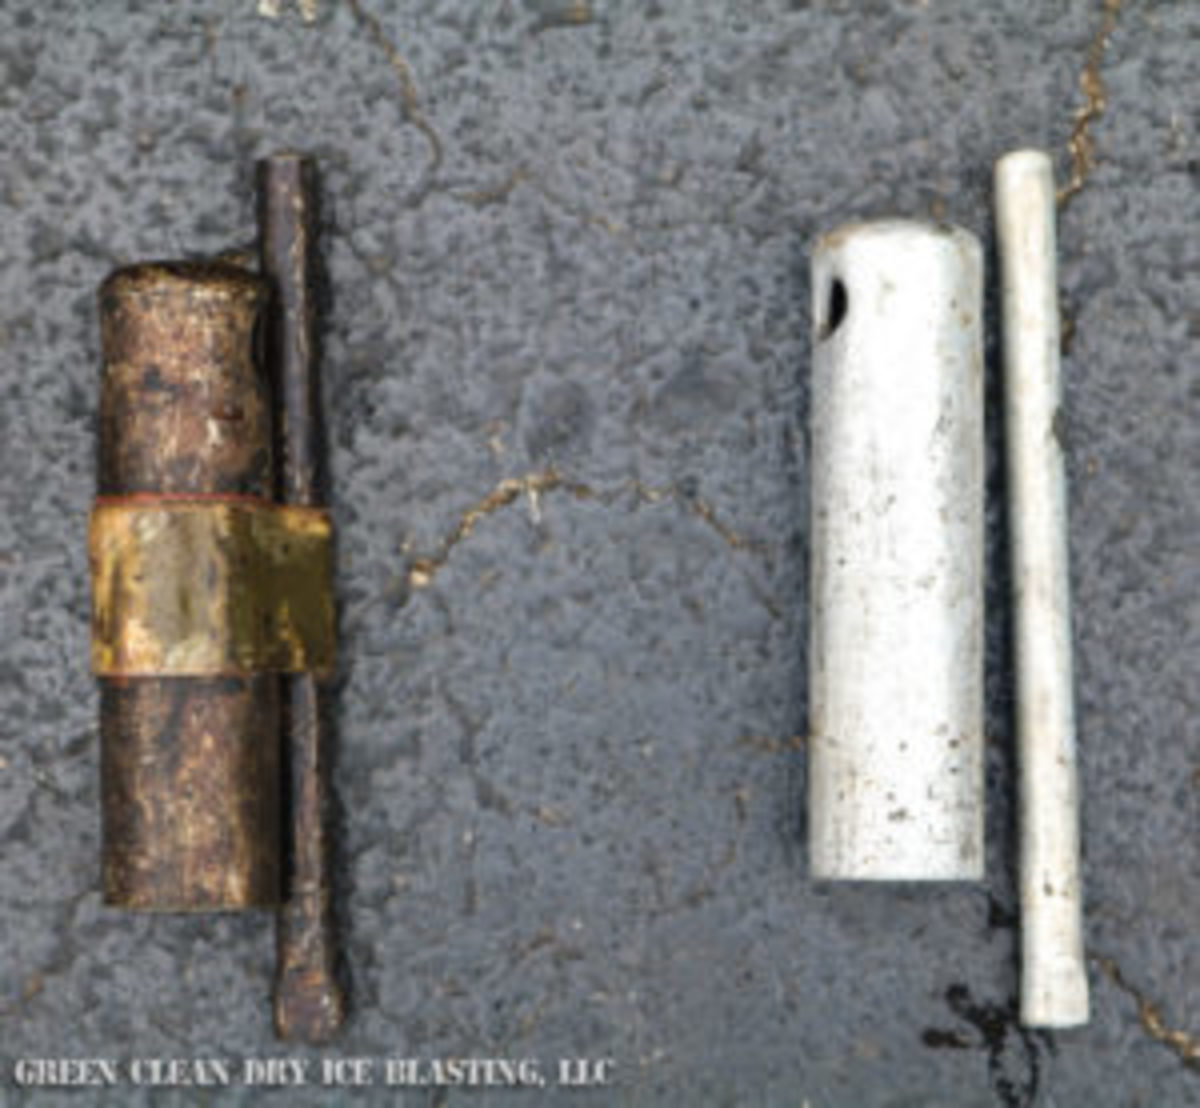  This shows a WWII US Army Jeep spark plug wrench that was originally treated with cosmoline to keep it free of rust until needed by the vehicle operator or mechanic. After a few seconds of blasting with dry ice, the wrench was completely clean with no damage to the original surface.